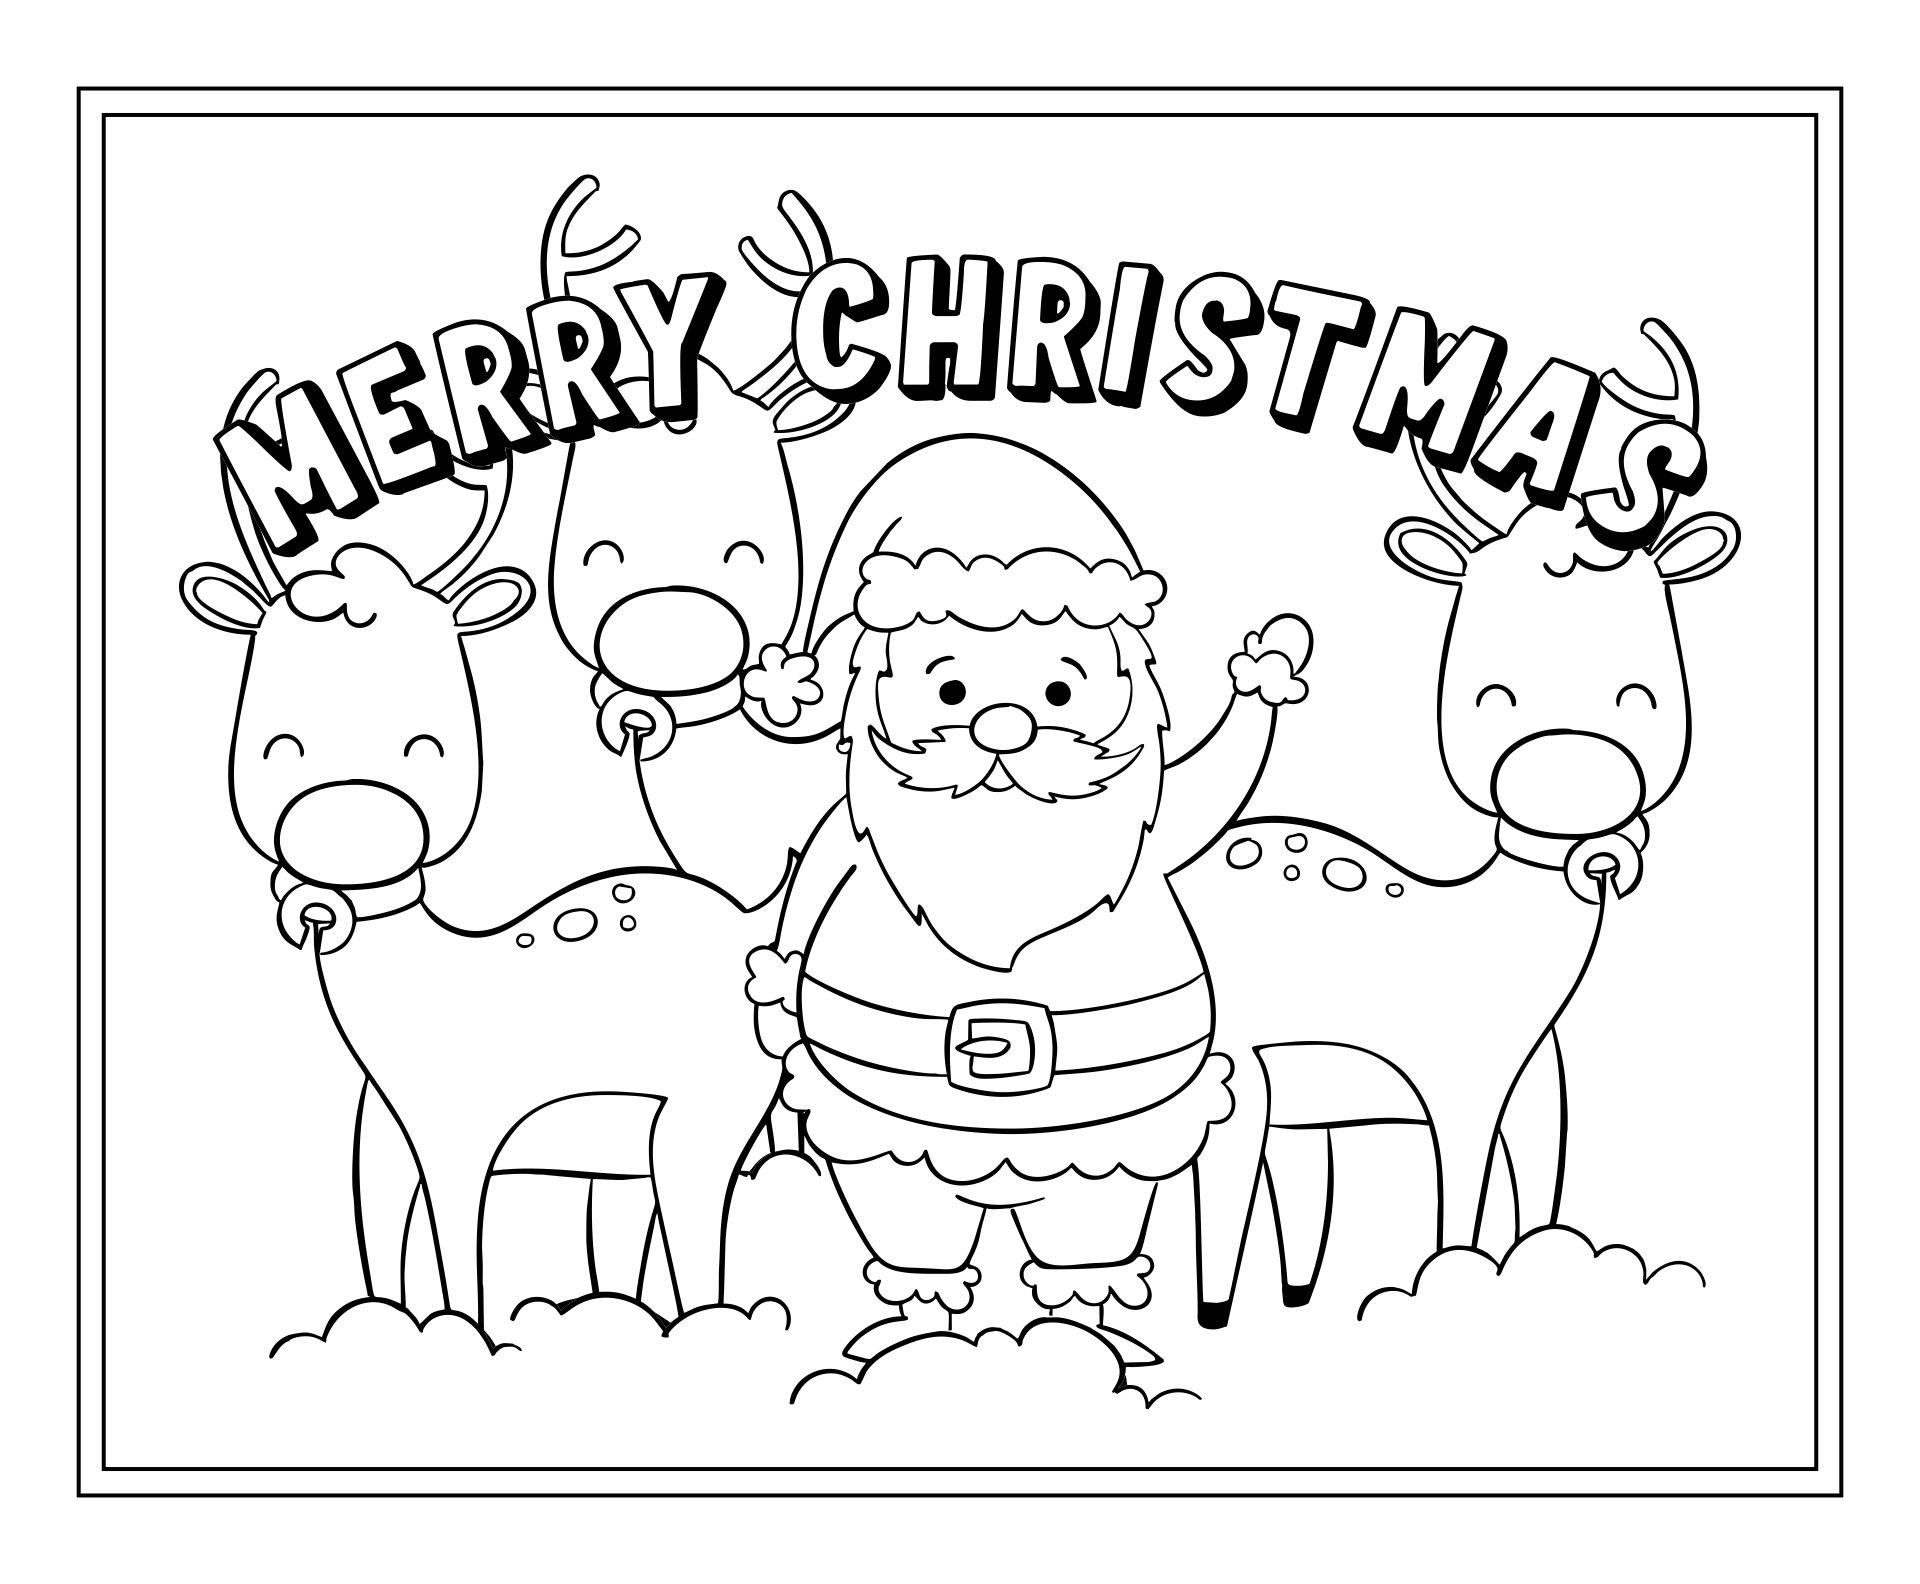 Merry Christmas Cards Coloring Pages